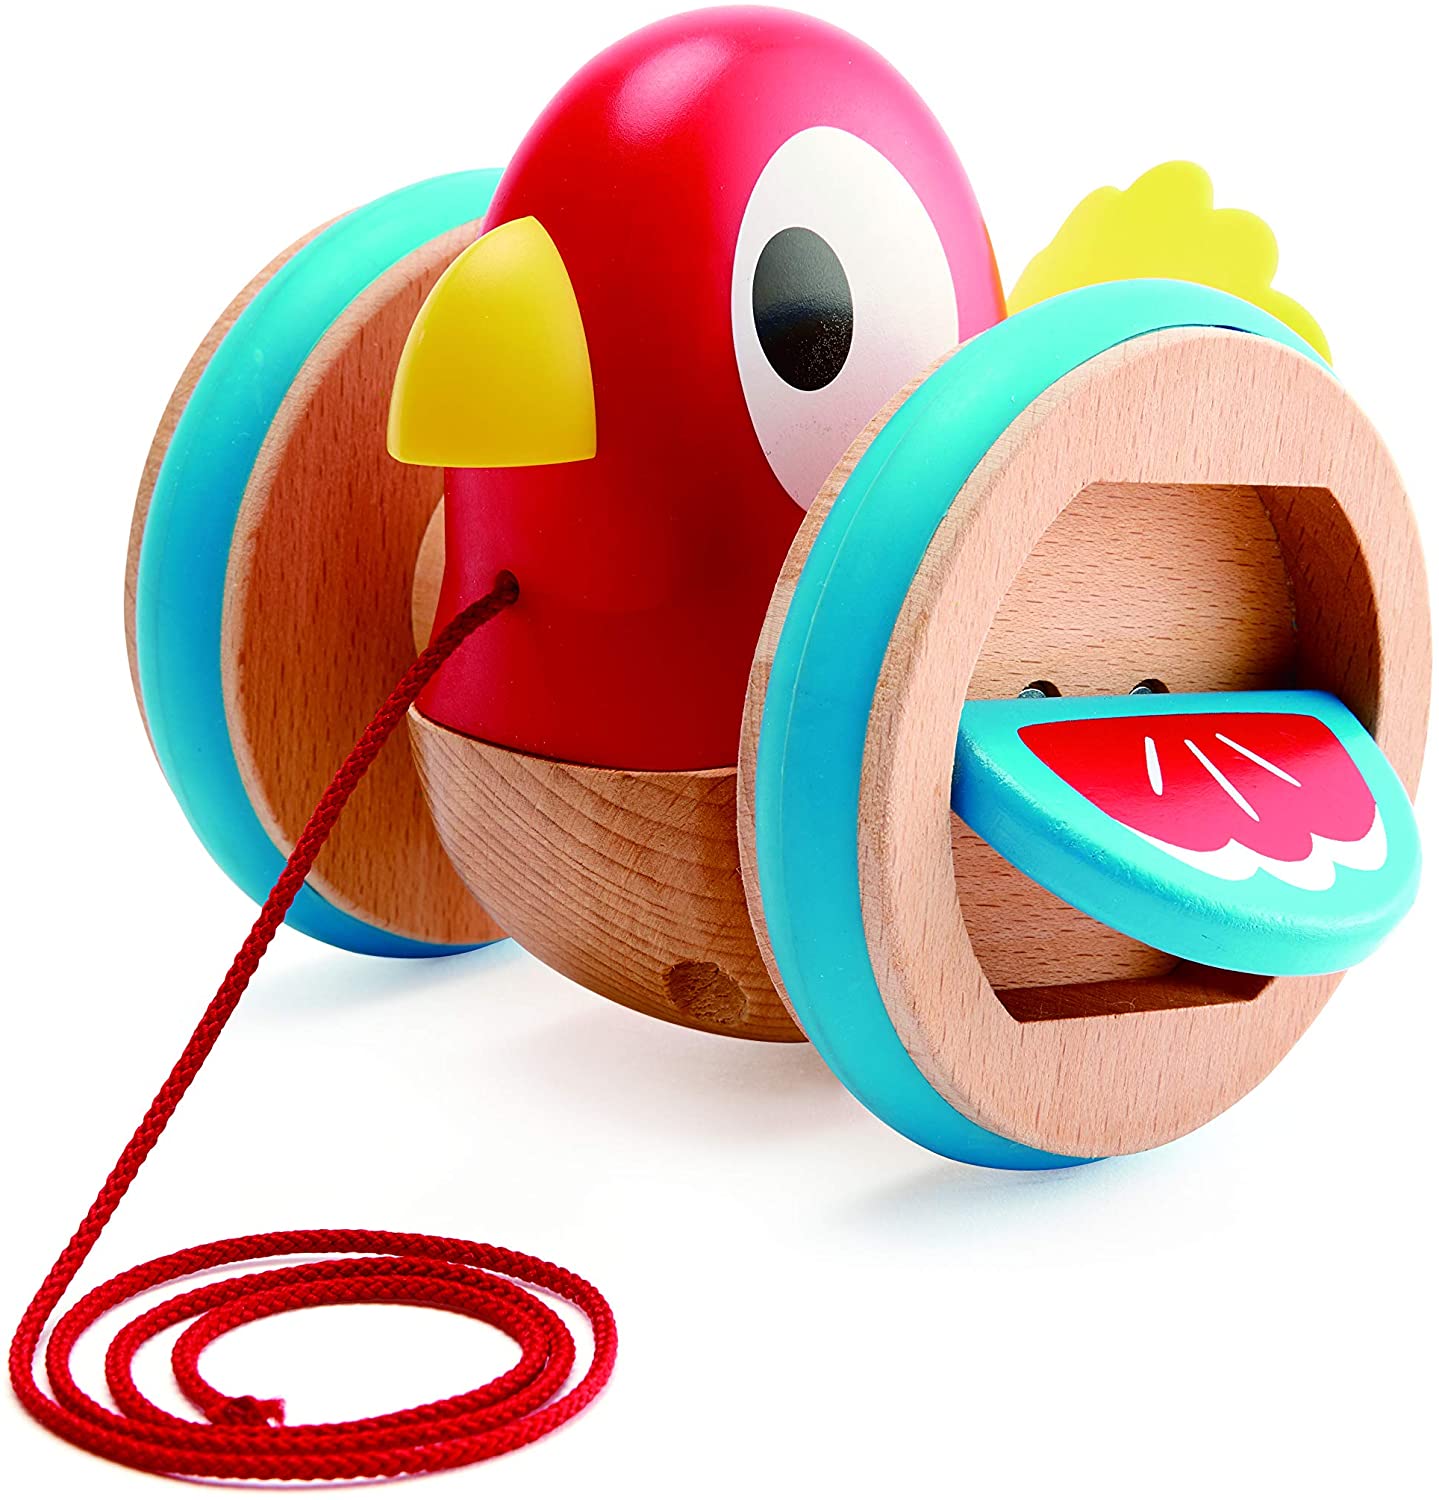 Hape Baby Bird Pull-Along | Wooden Wobbling & Flapping Pull Toddler Toy, Bright Colors Multicolor, L: 5.2, W: 5, H: 4.8 inch